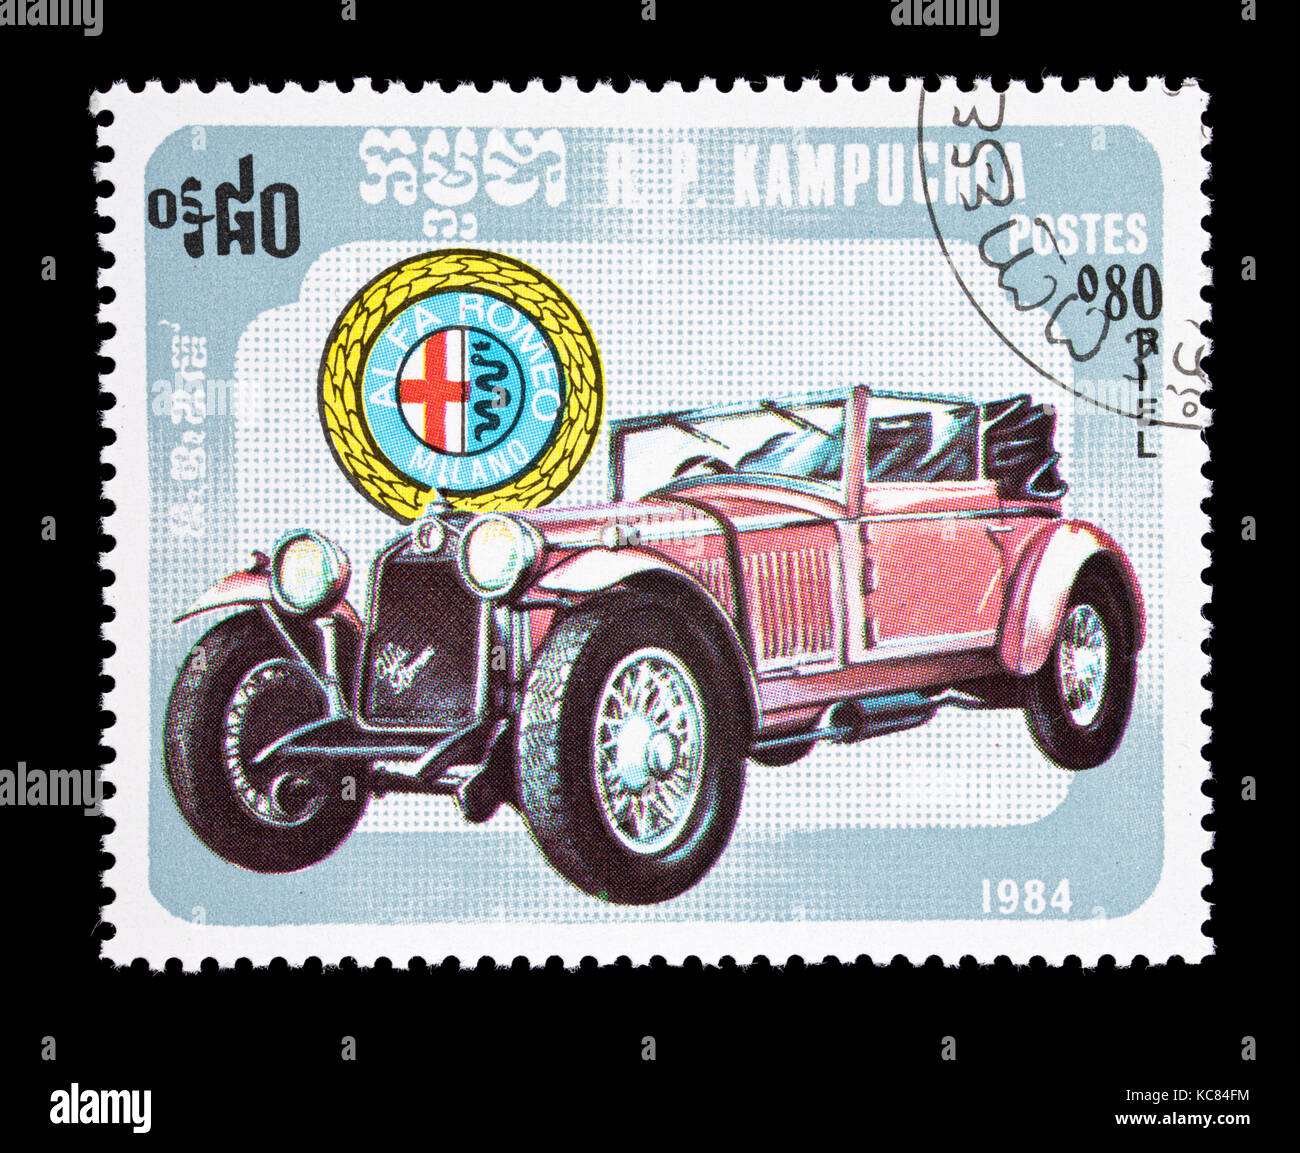 Postage stamp from Cambodia (Kampuchea) depicting a Alfa Romeo classic antique automobile. Stock Photo